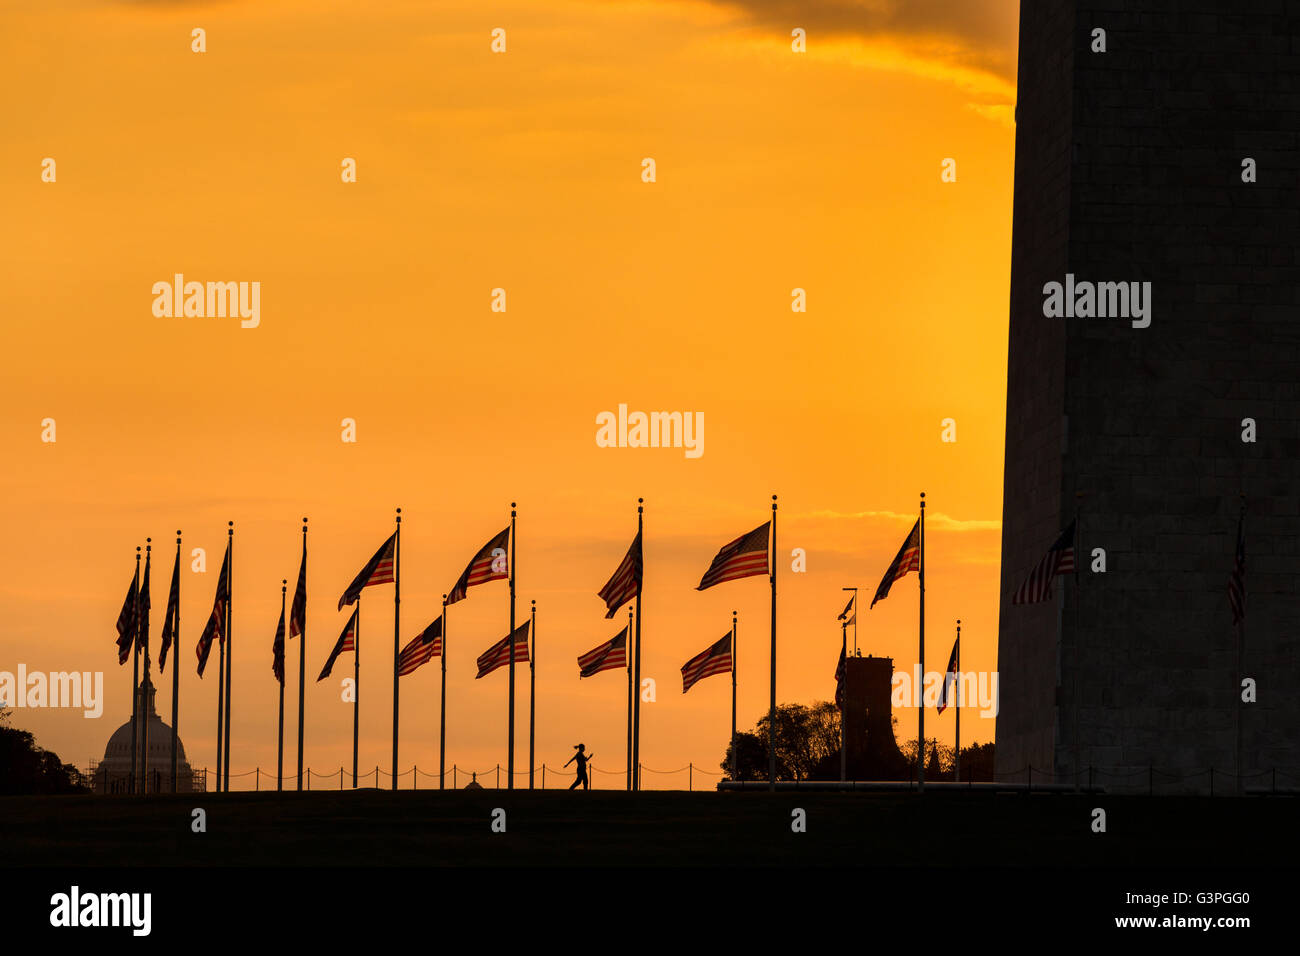 Flags around the Washington Monument flutter silhouetted by sunset in Washington, DC. Stock Photo